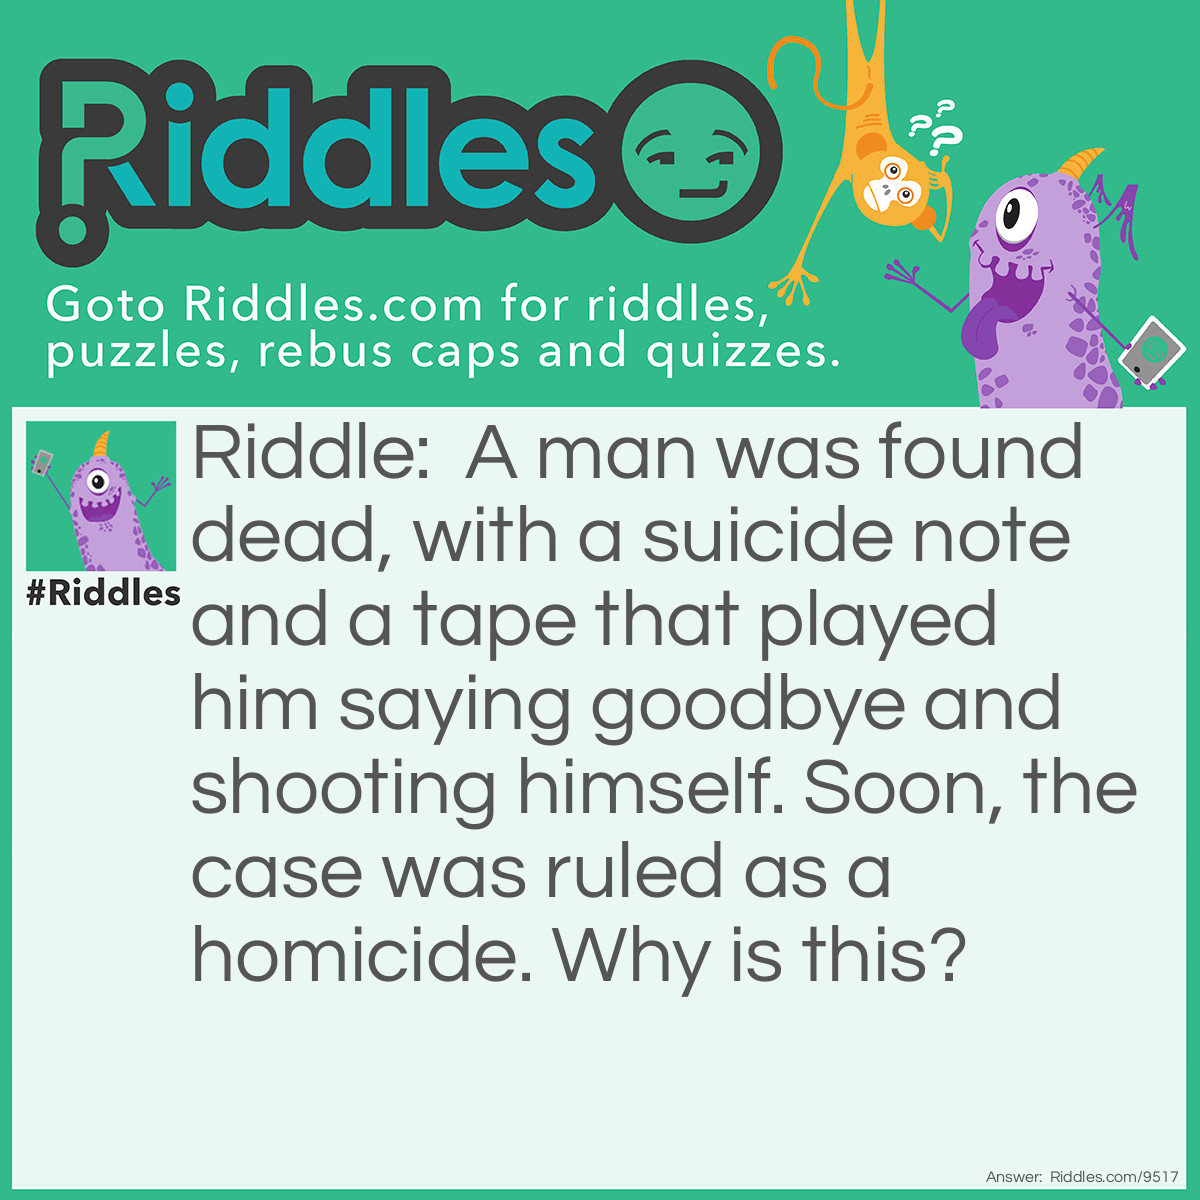 Riddle: A man was found dead, with a suicide note and a tape that played him saying goodbye and shooting himself. Soon, the case was ruled as a homicide. Why is this? Answer: Because the man would not be able to end/wind the tape, meaning the tape would still have been recording,